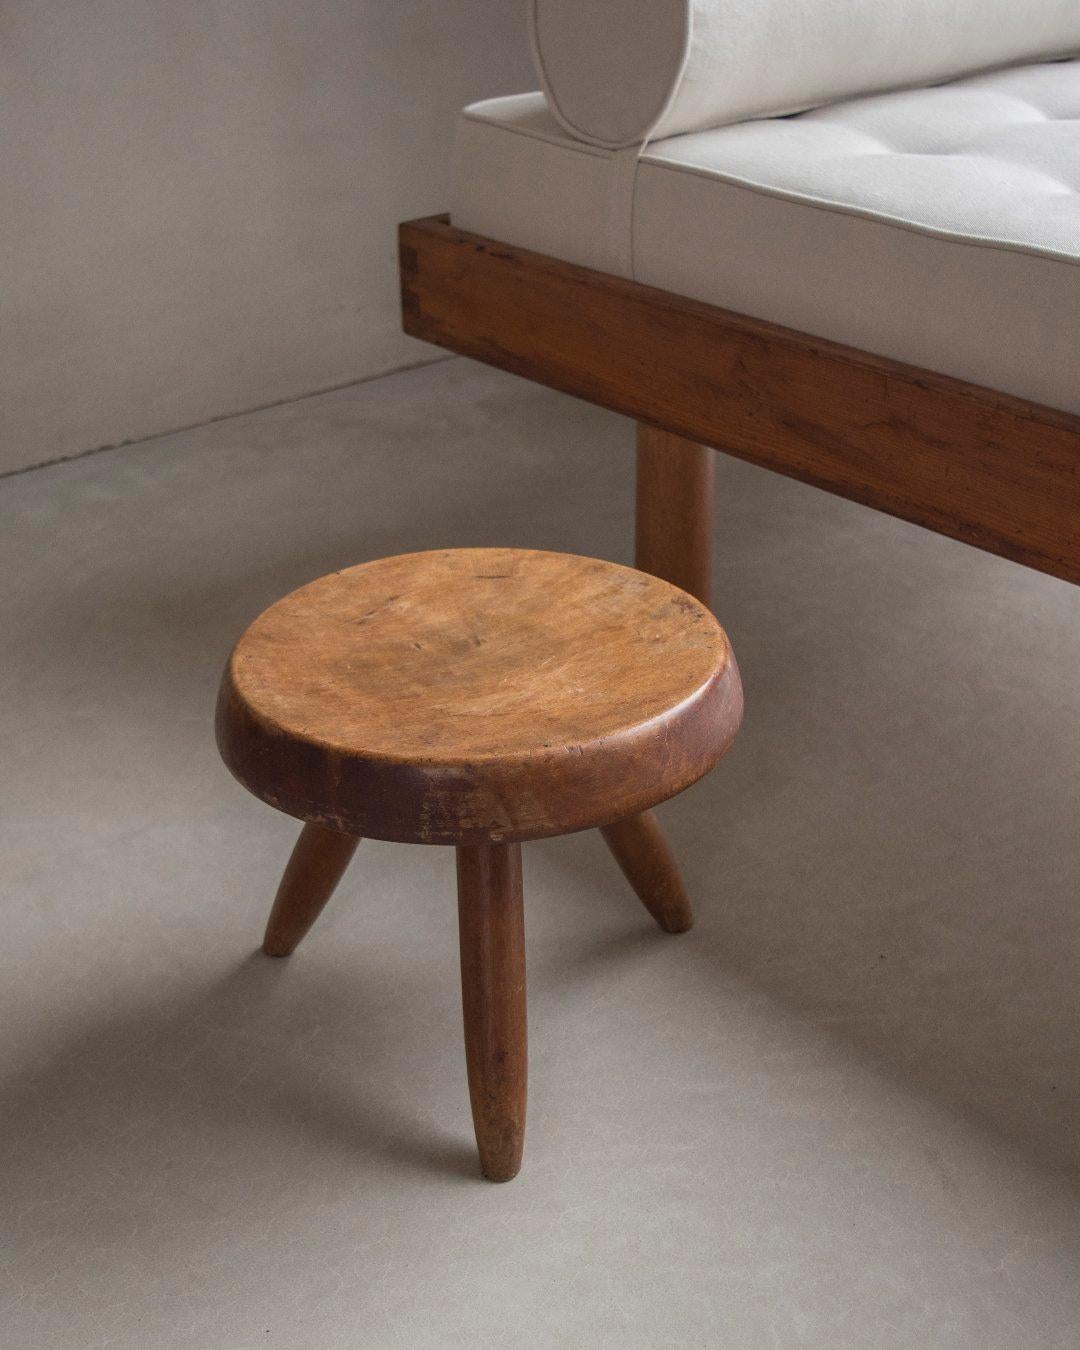 Turned Charlotte Perriand, Vintage Berger Stool, circa 1950s, Mahogany For Sale